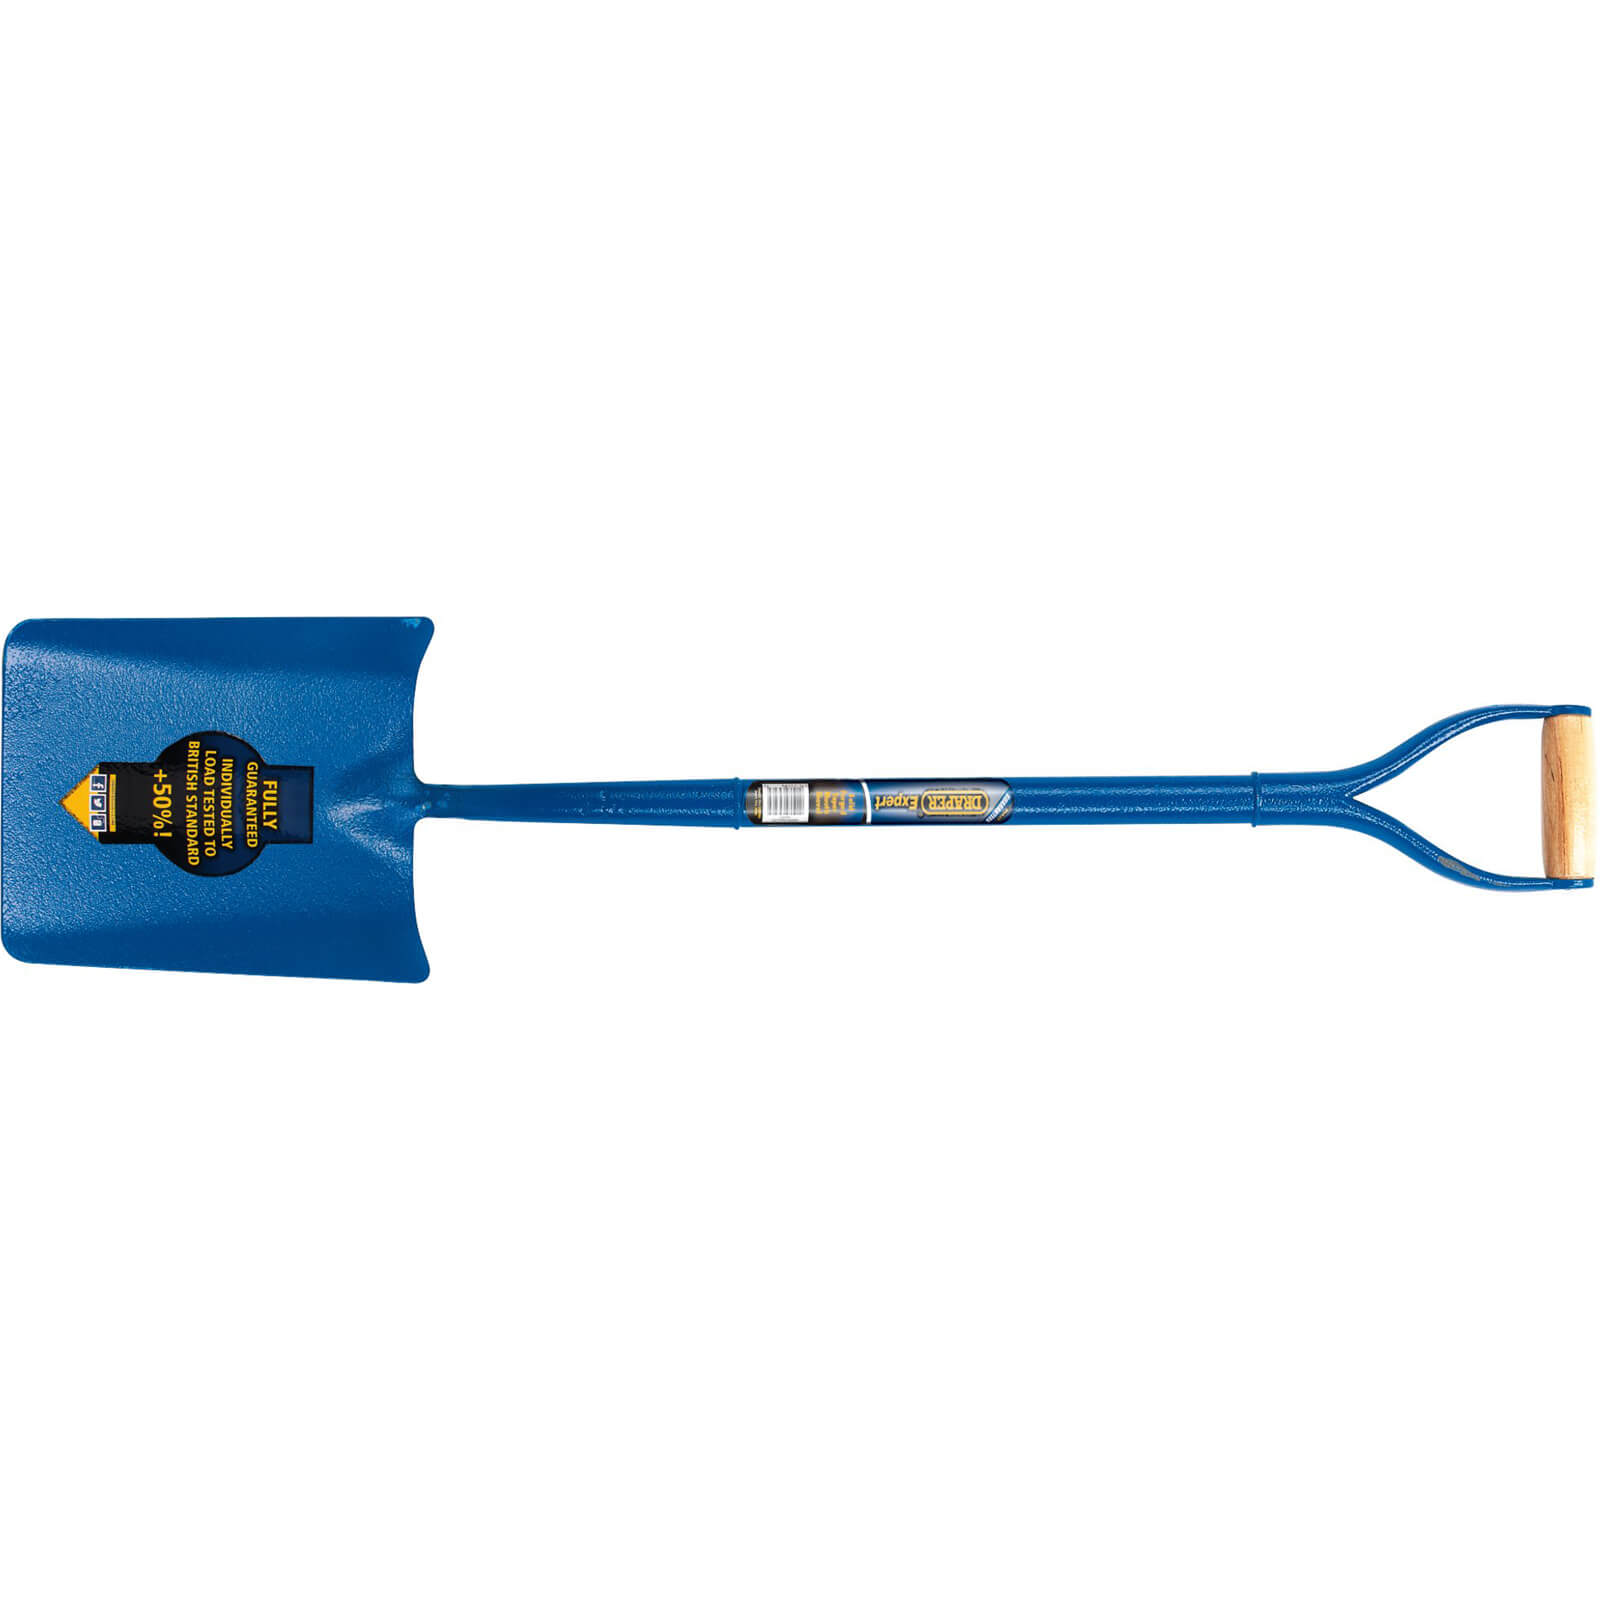 Image of Draper Solid Forged Contractors Taper Mouth Shovel